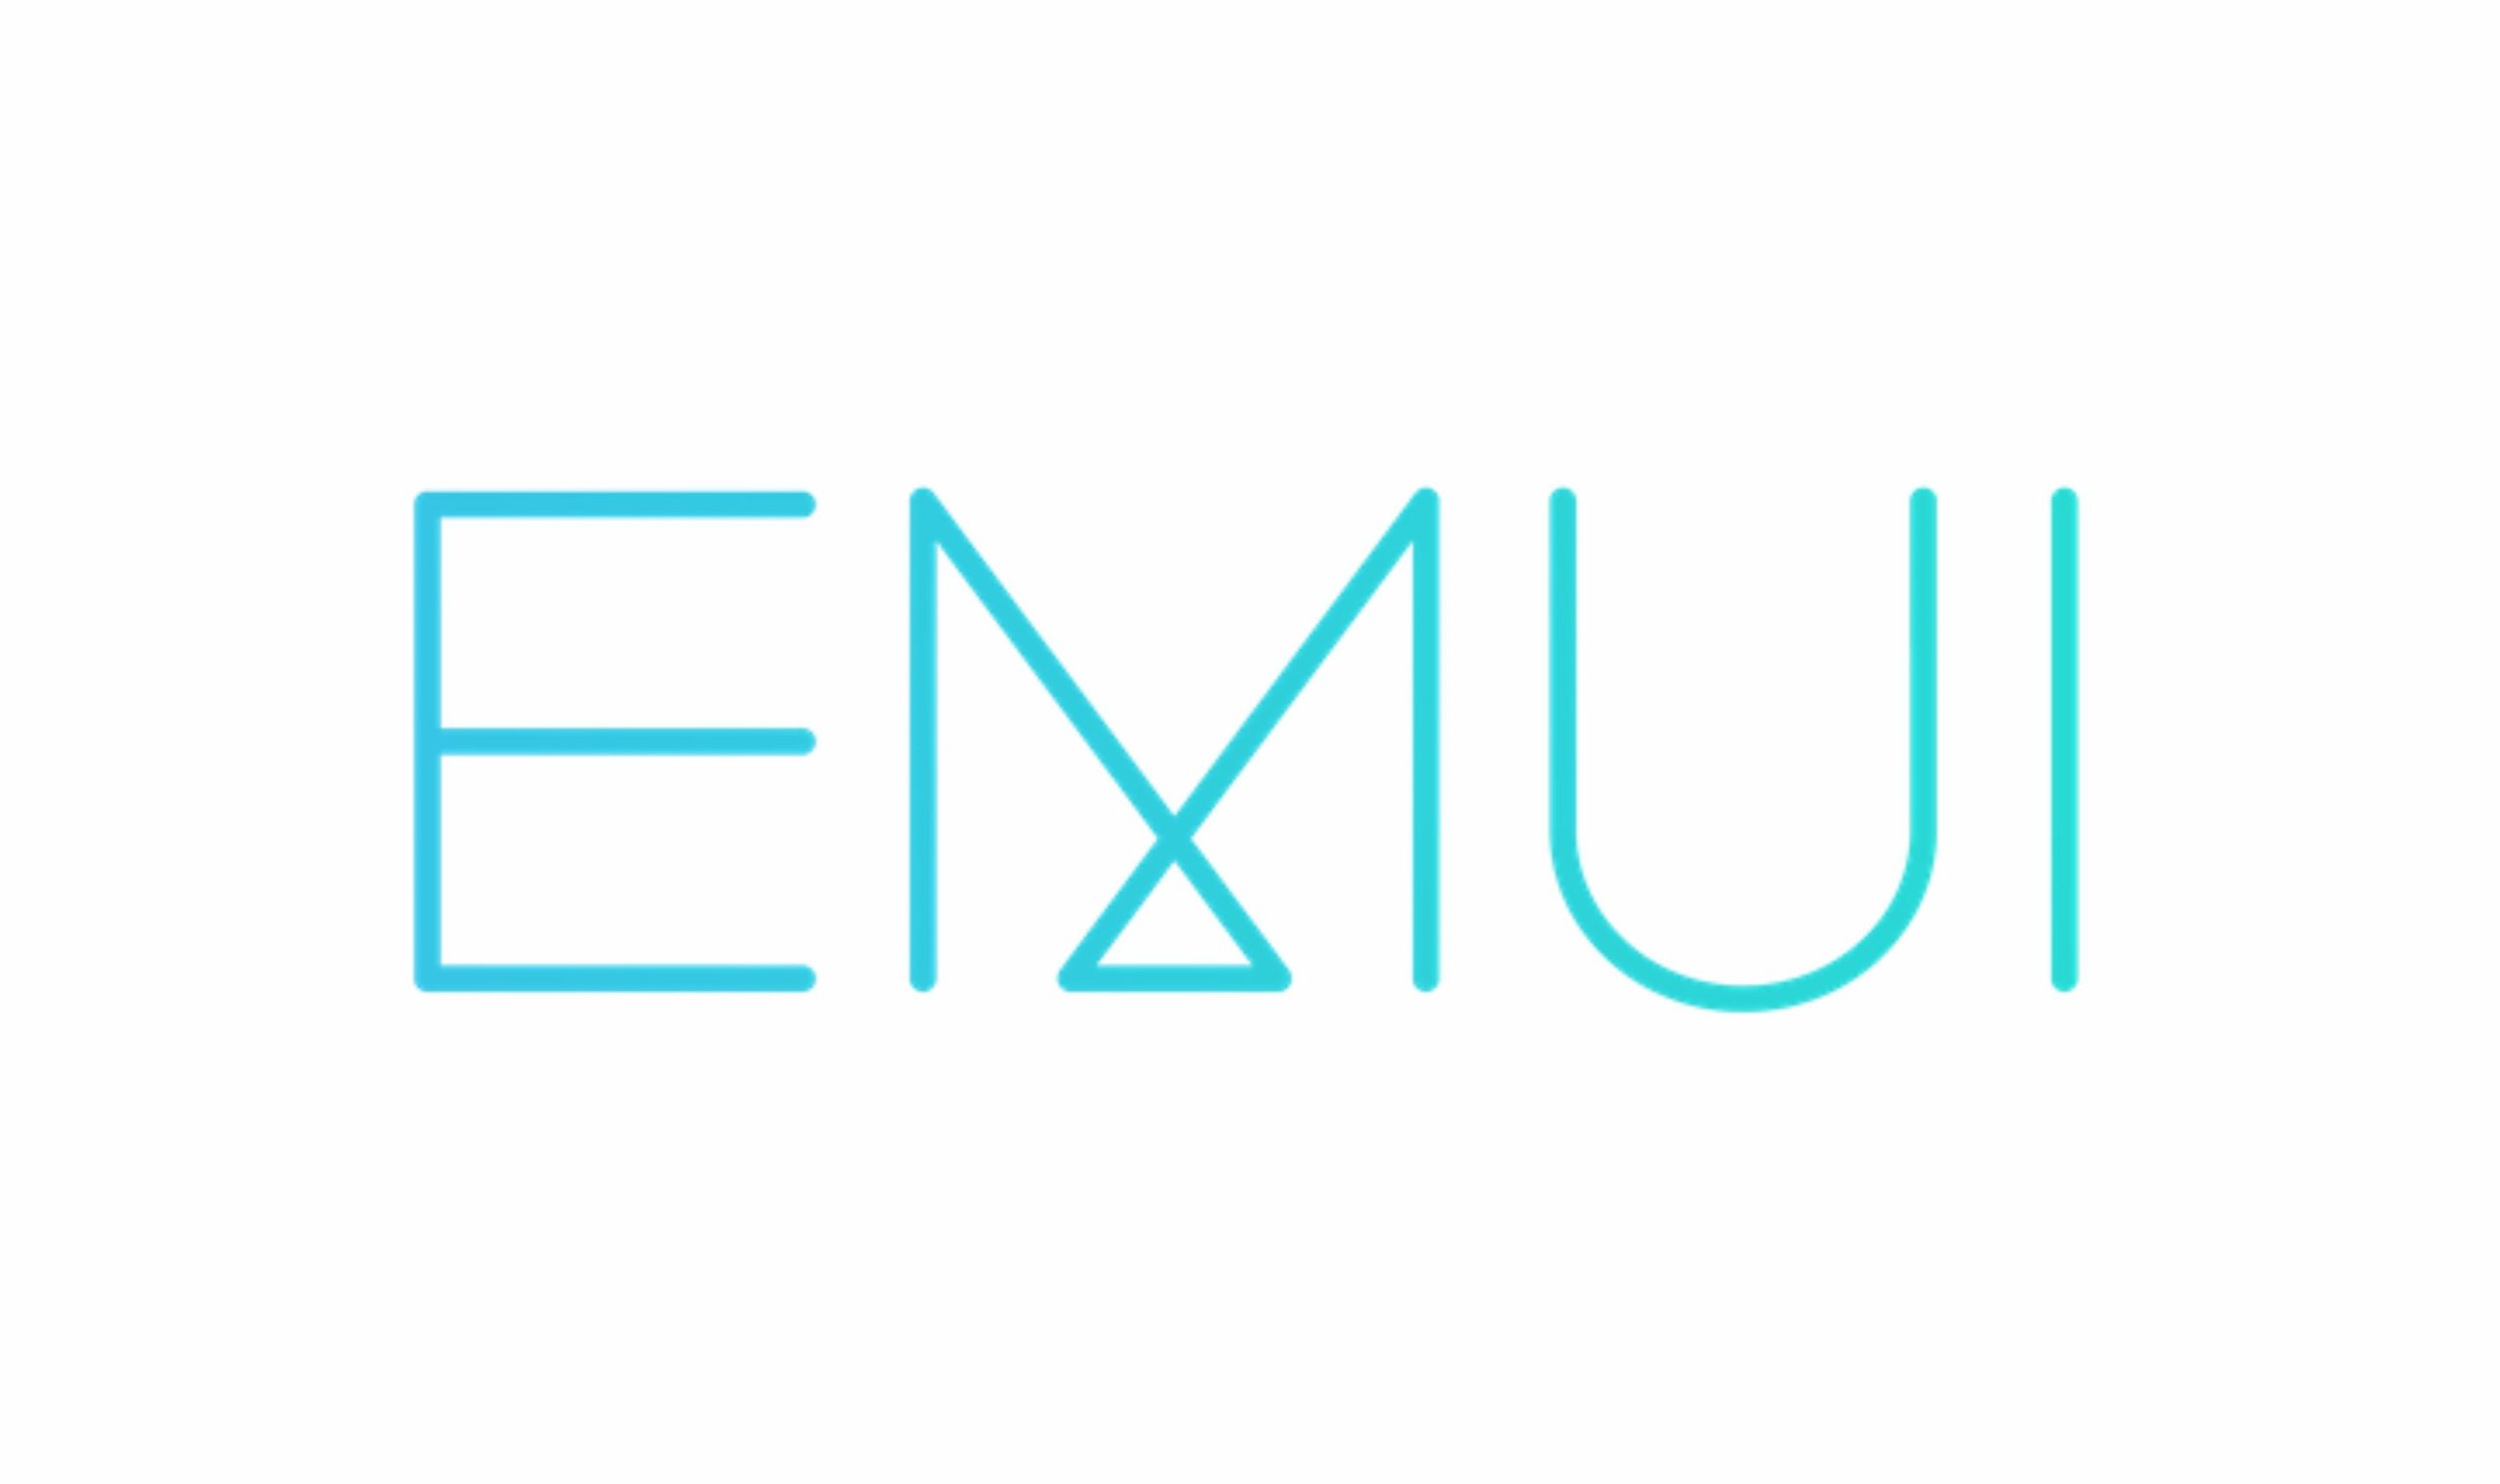 EMUI 11 tipped to come with revamped AOD, smart-split screen, and comprehensive translation services